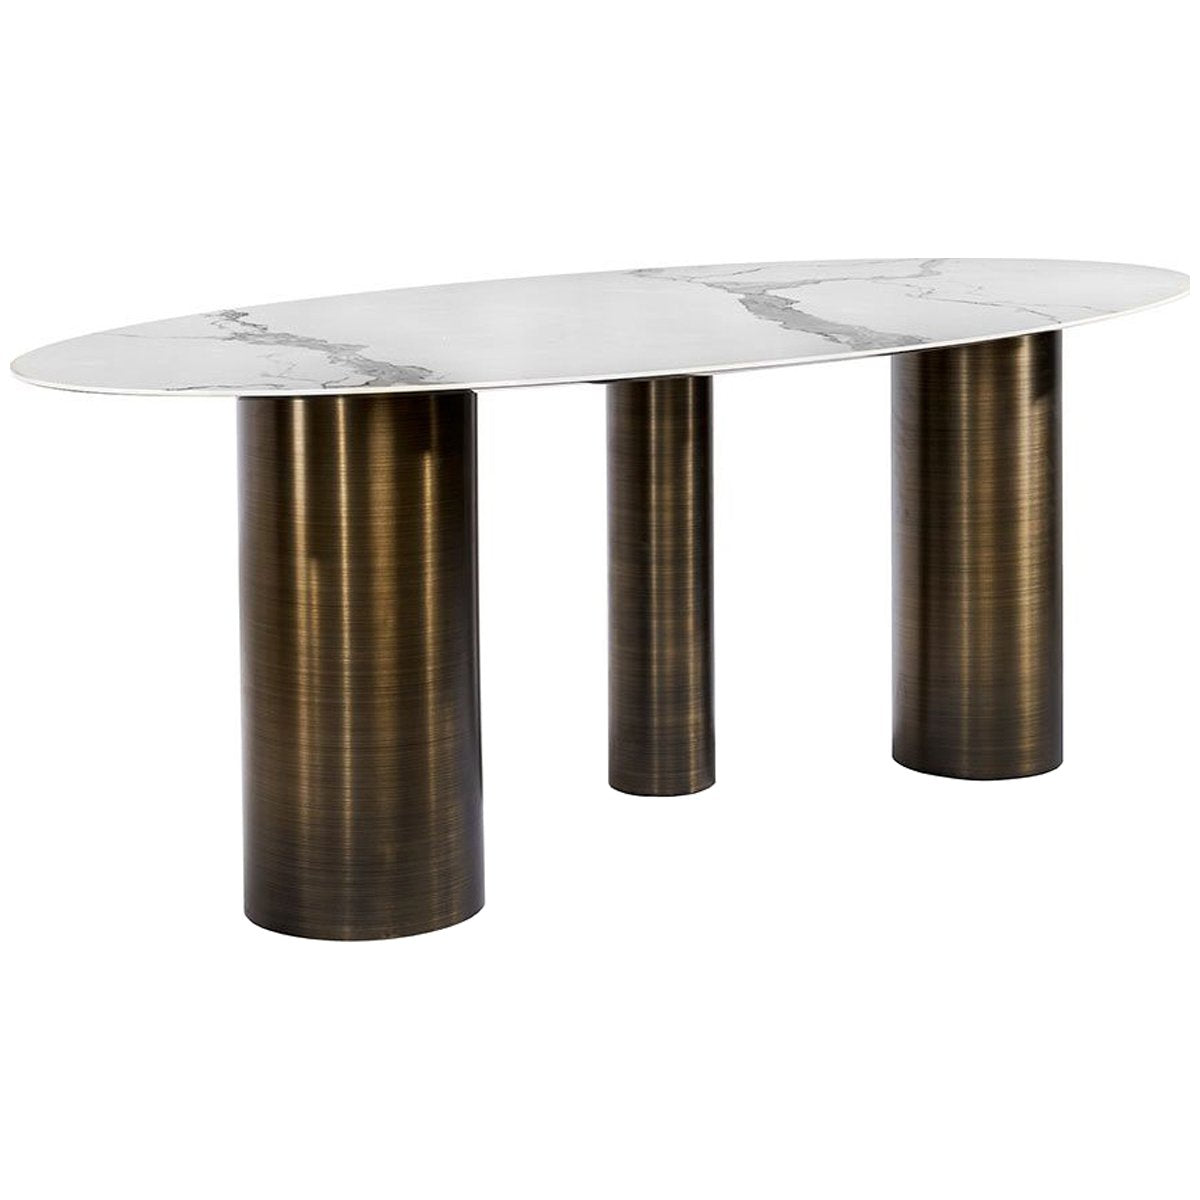 Interlude Home Chantal Dining Table